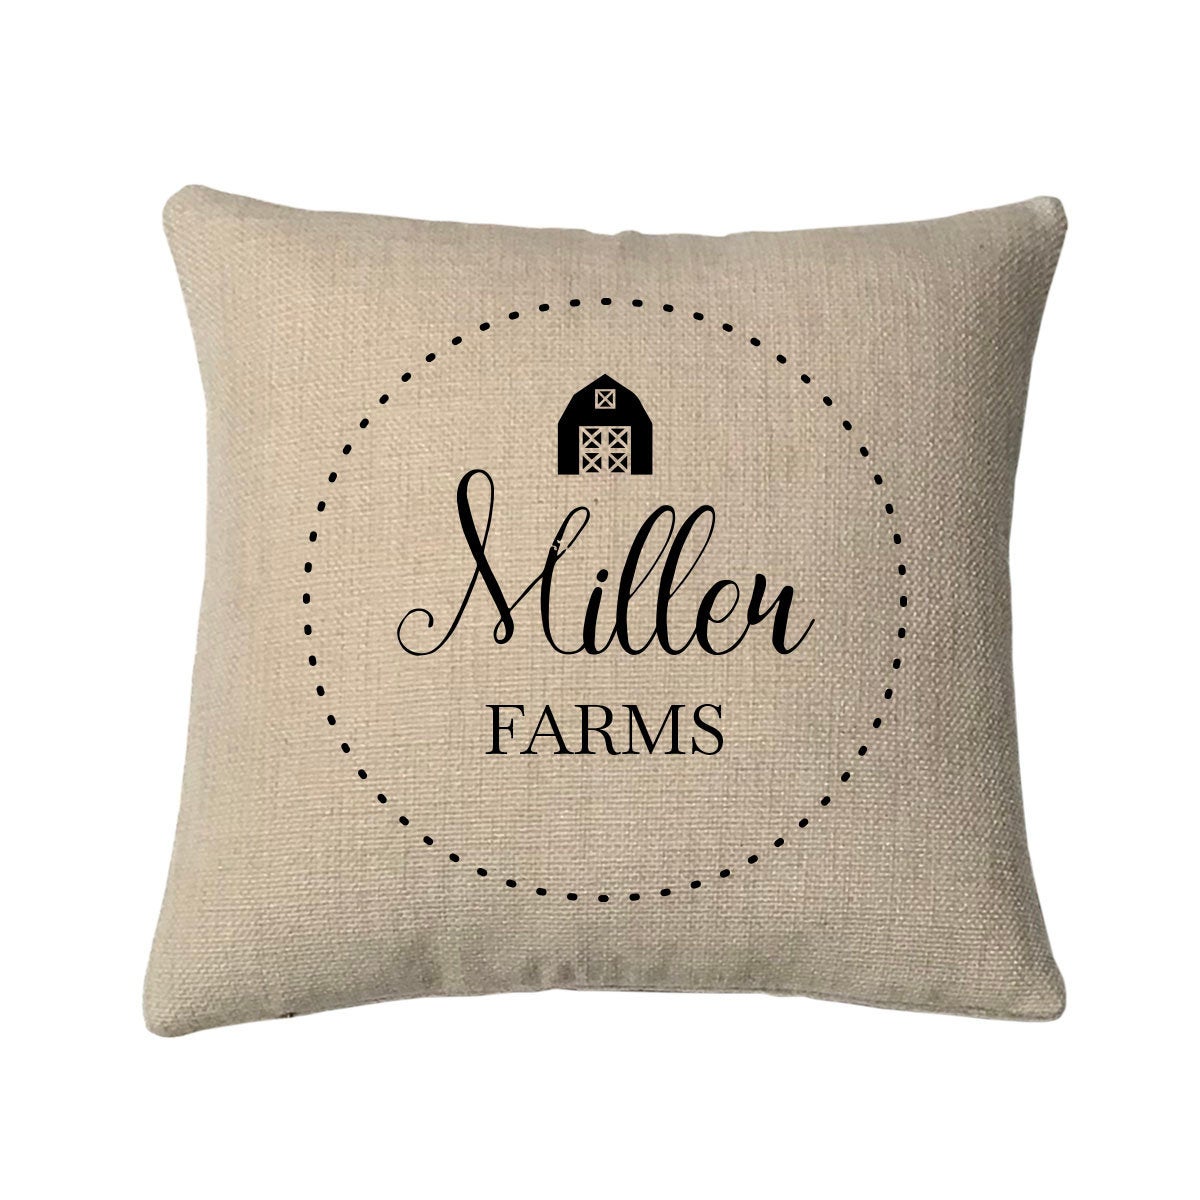 Personalized Farm House Mini Throw Pillow Measures 9.5 Inches X 9.5 Inches (Insert is included) Complete Very Small Throw Pillow